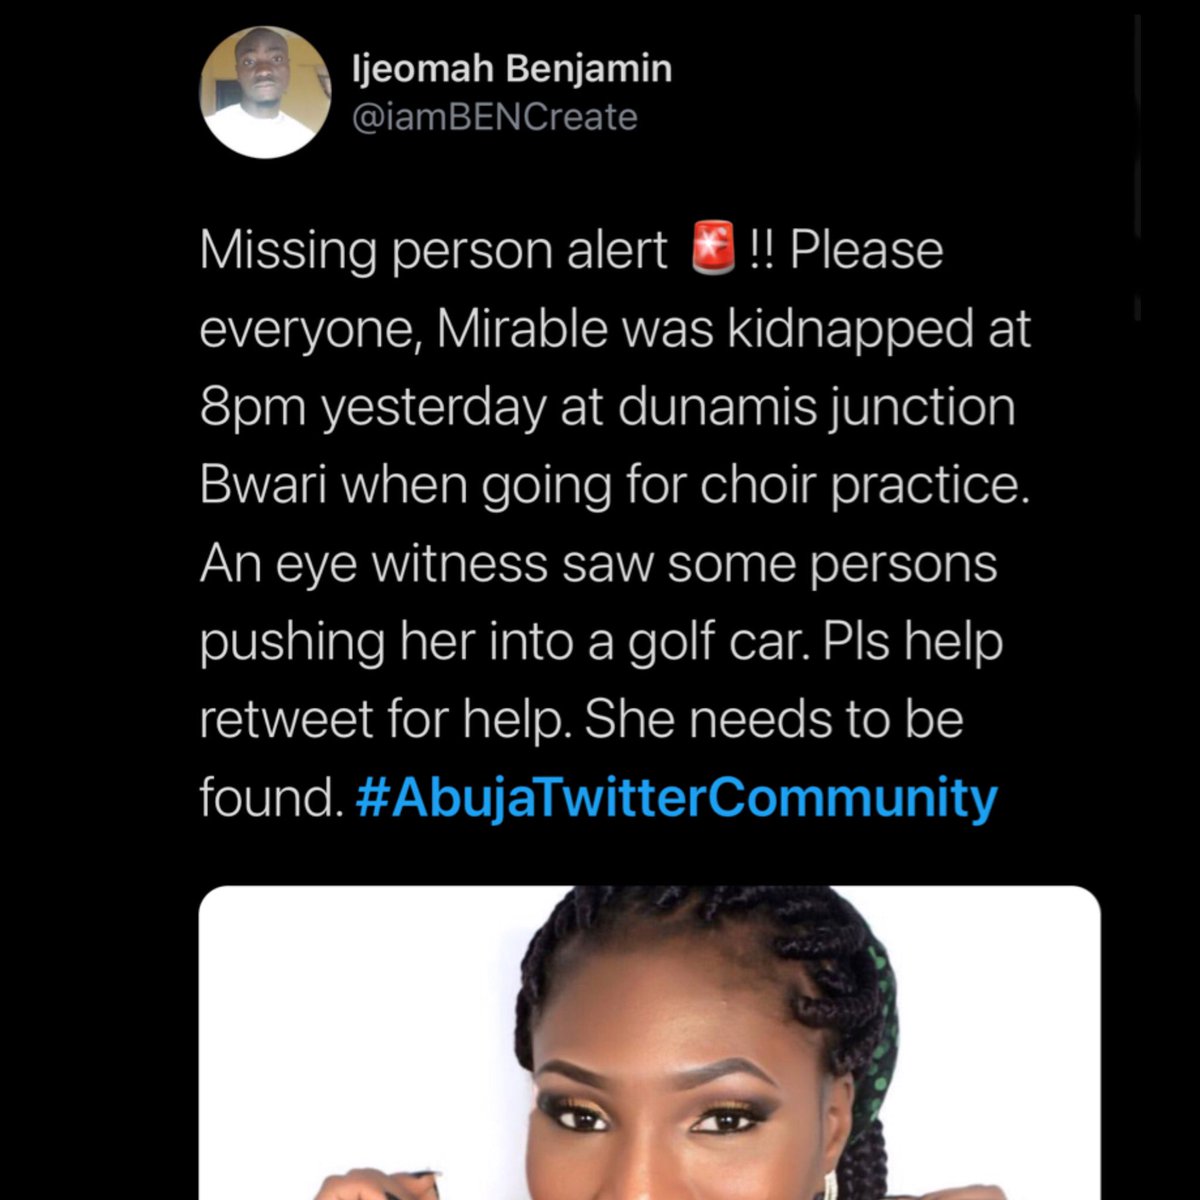 RT @iam_skamal: MISSING PERSON!

Please don't pass without retweeting. https://t.co/Tm7uGyZ5Mk